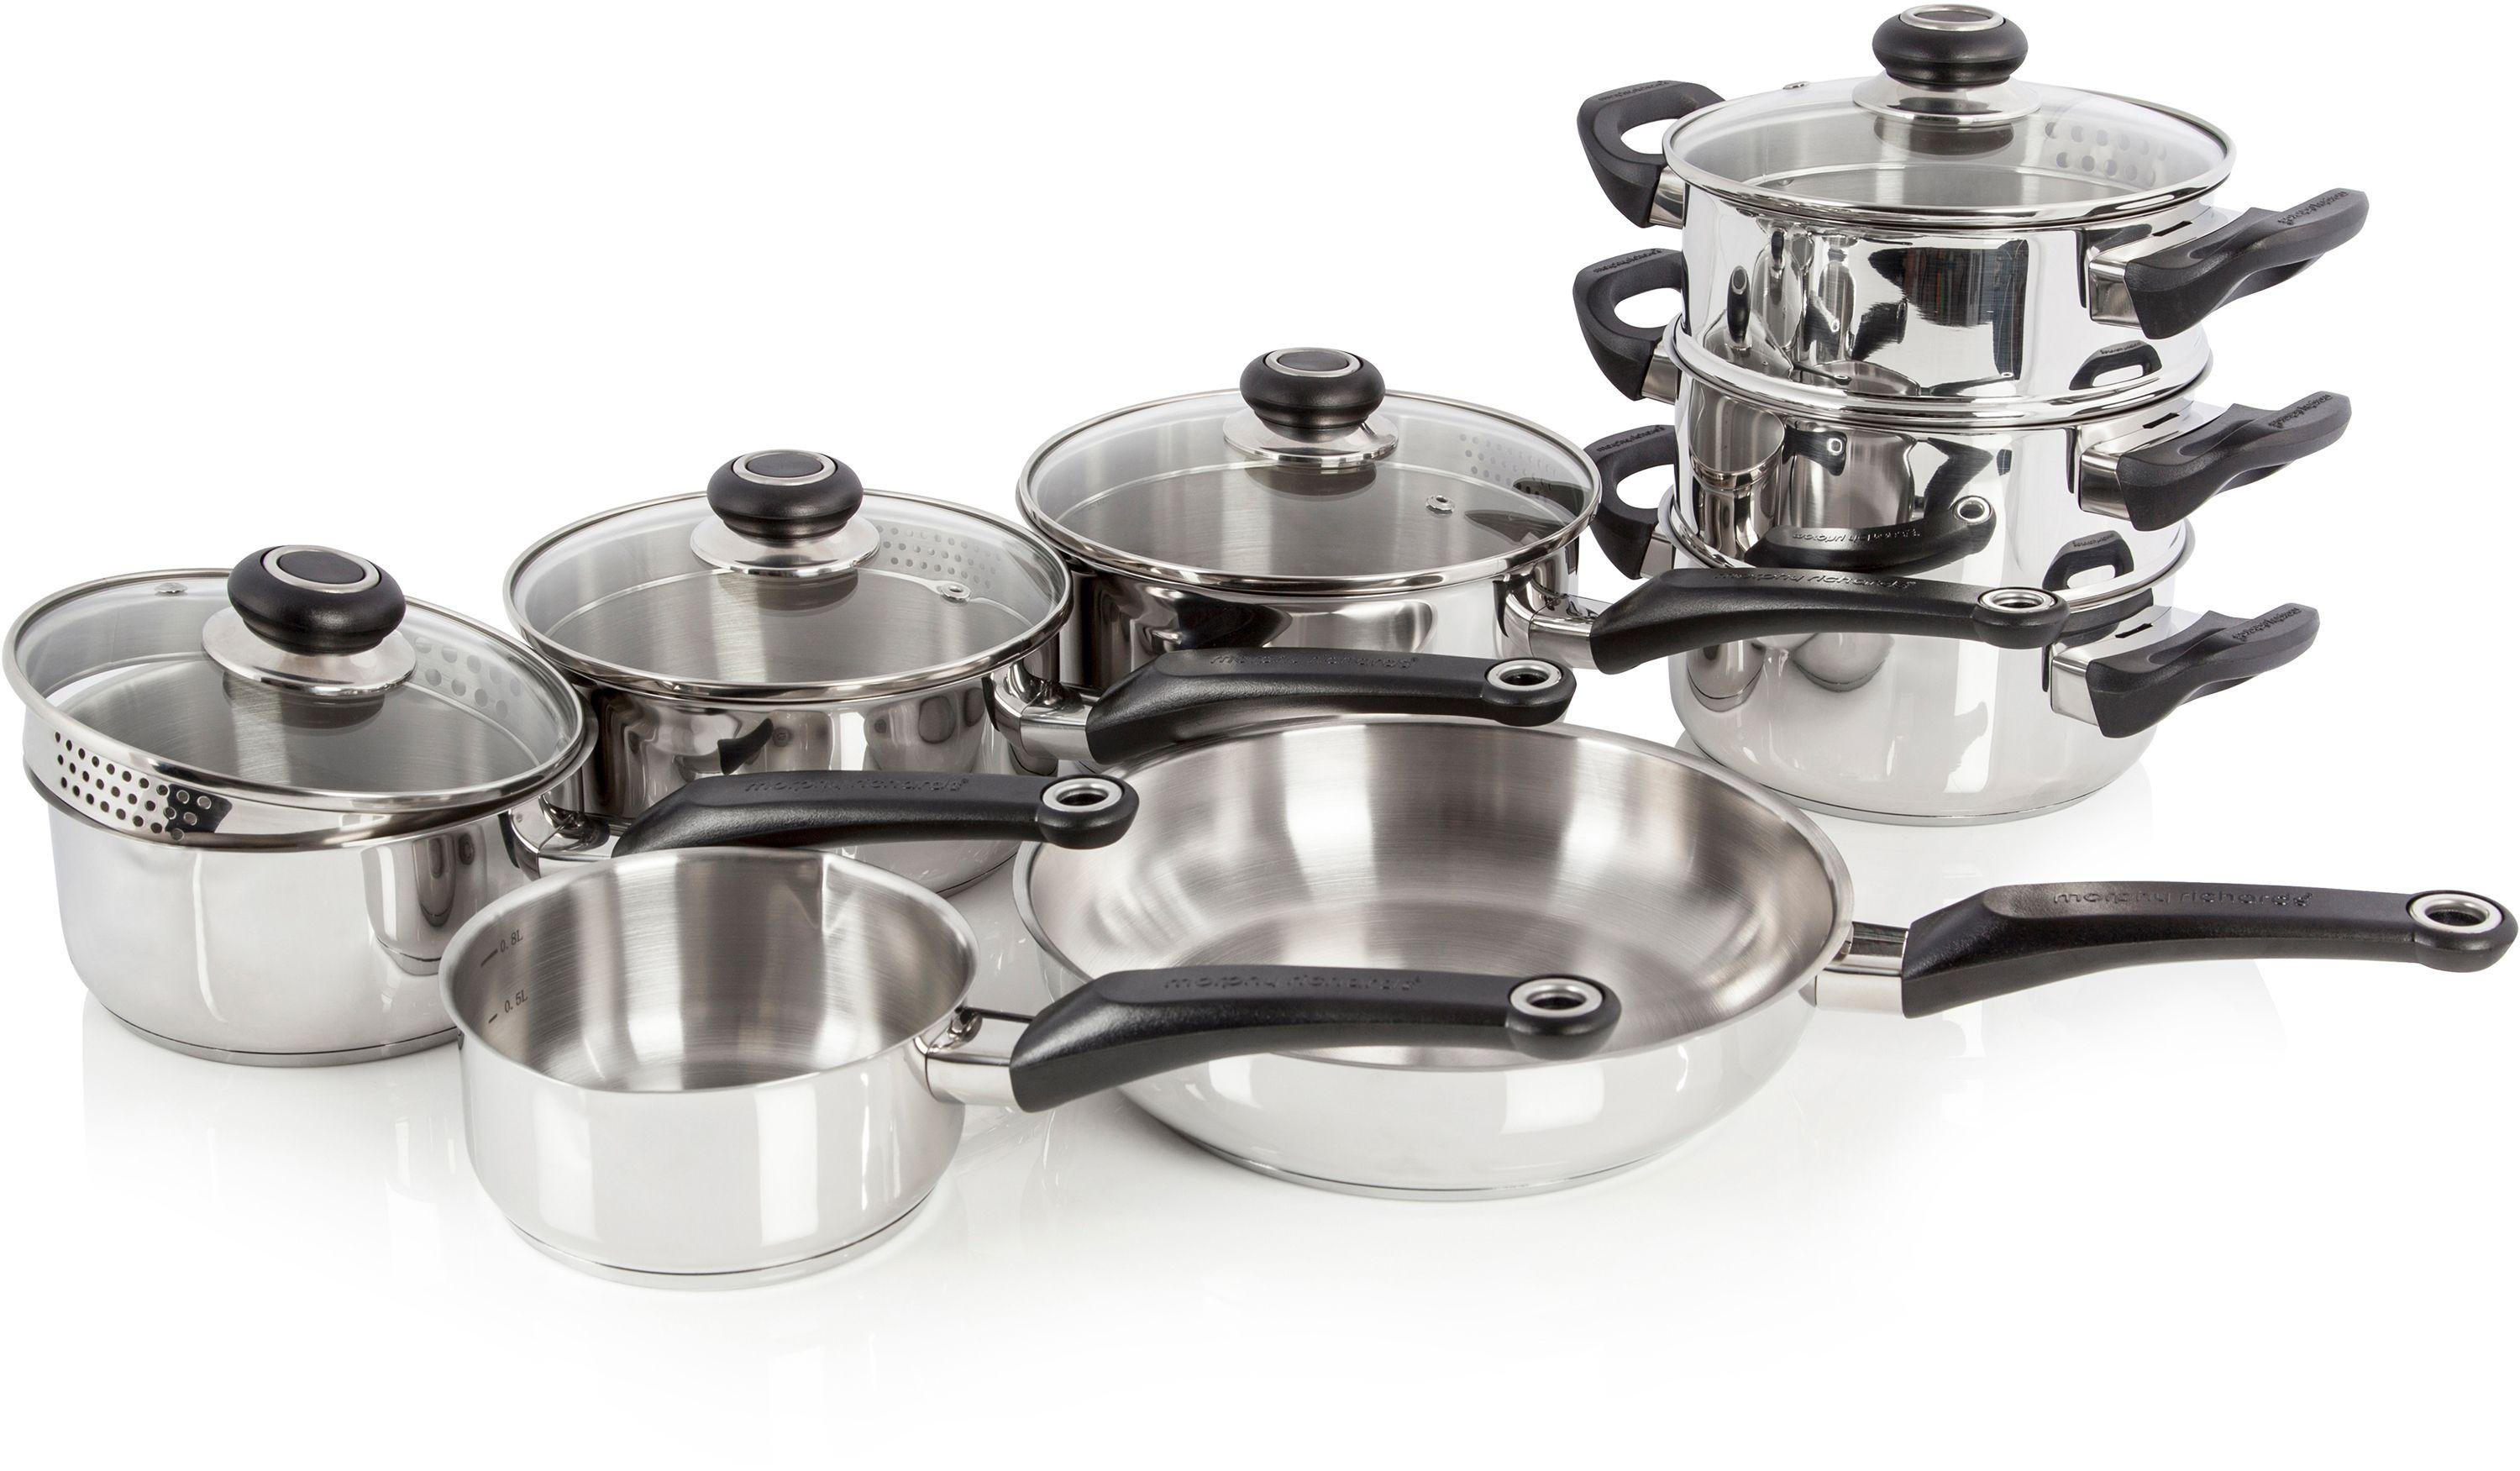 Morphy Richards Equip 8 Piece Stainless Steel Pan Set